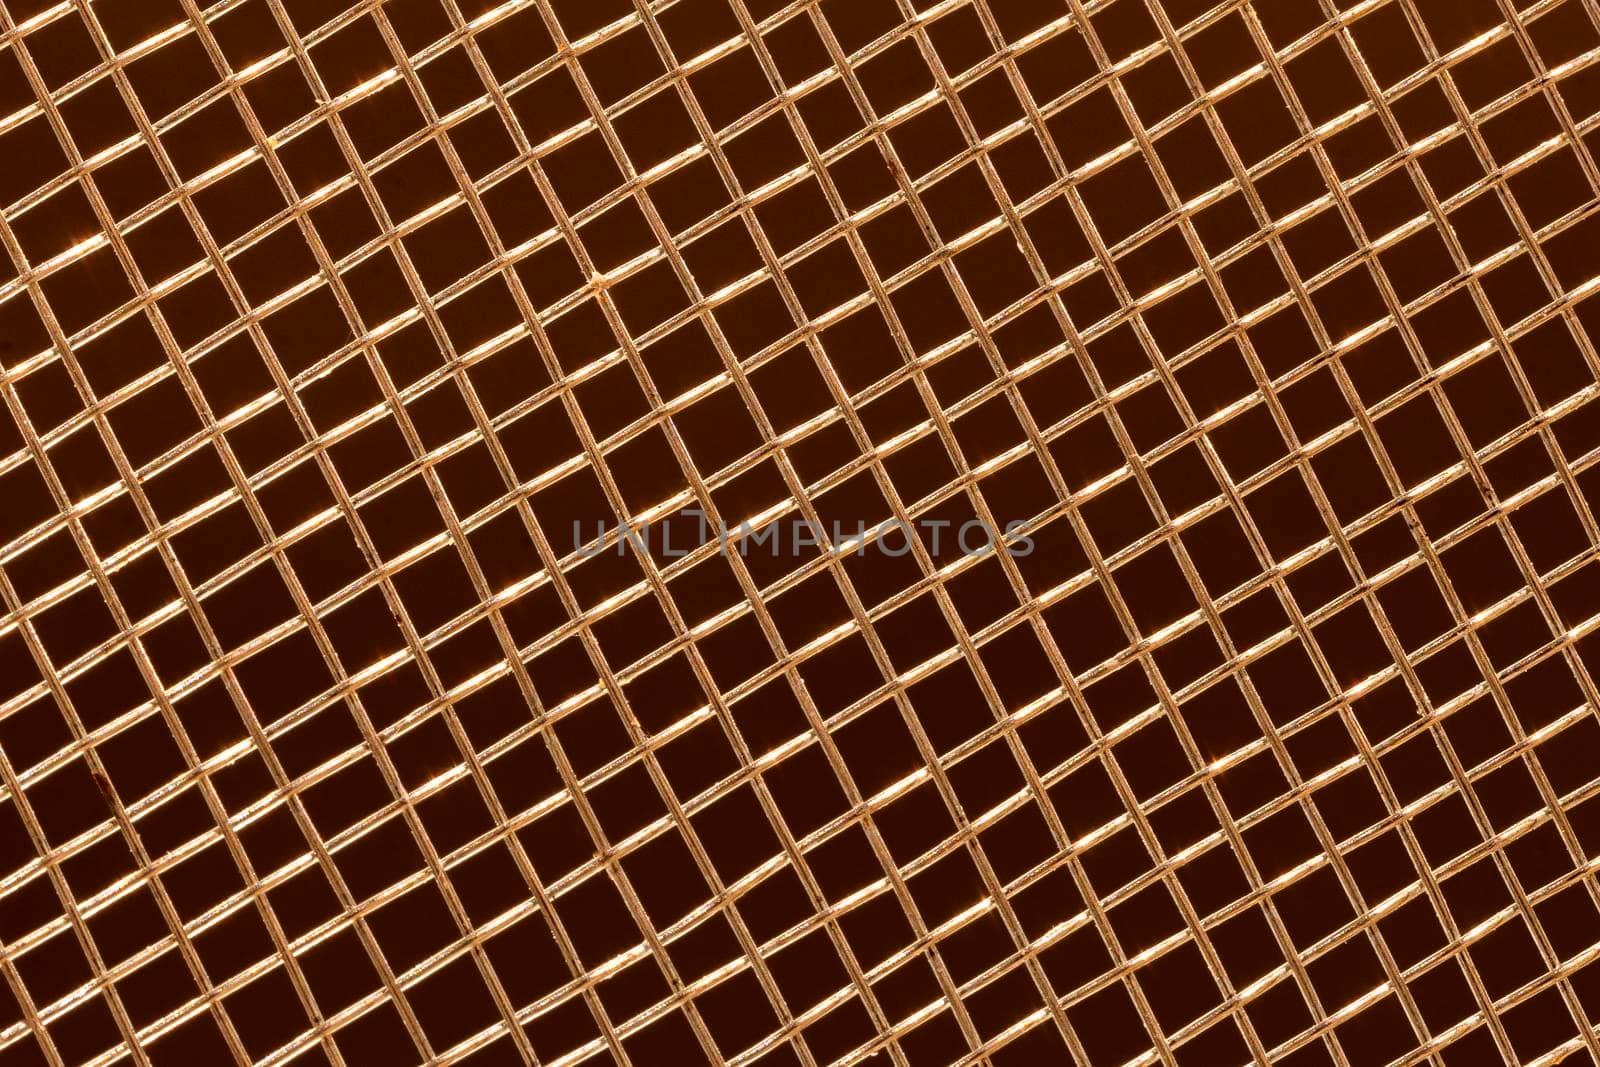 grid with a pattern of numerous small shaped cells on dark background, close view by EdVal